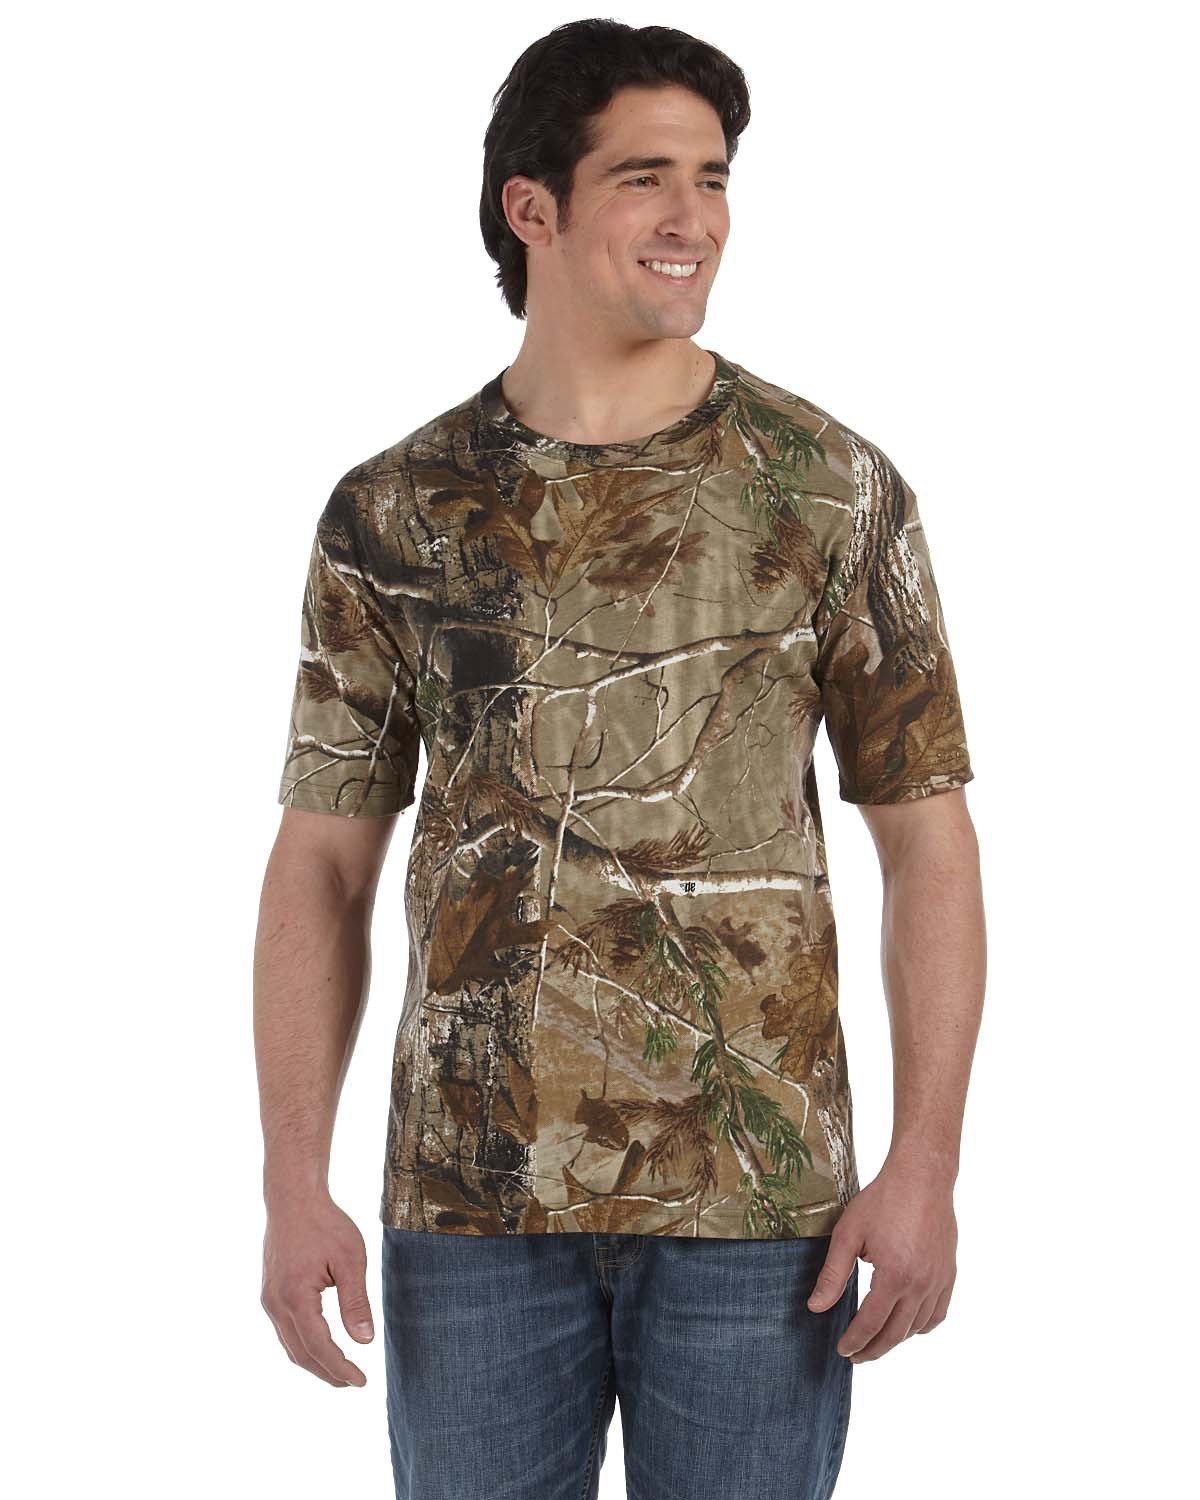 Front view of Men’s Realtree Camo T-Shirt